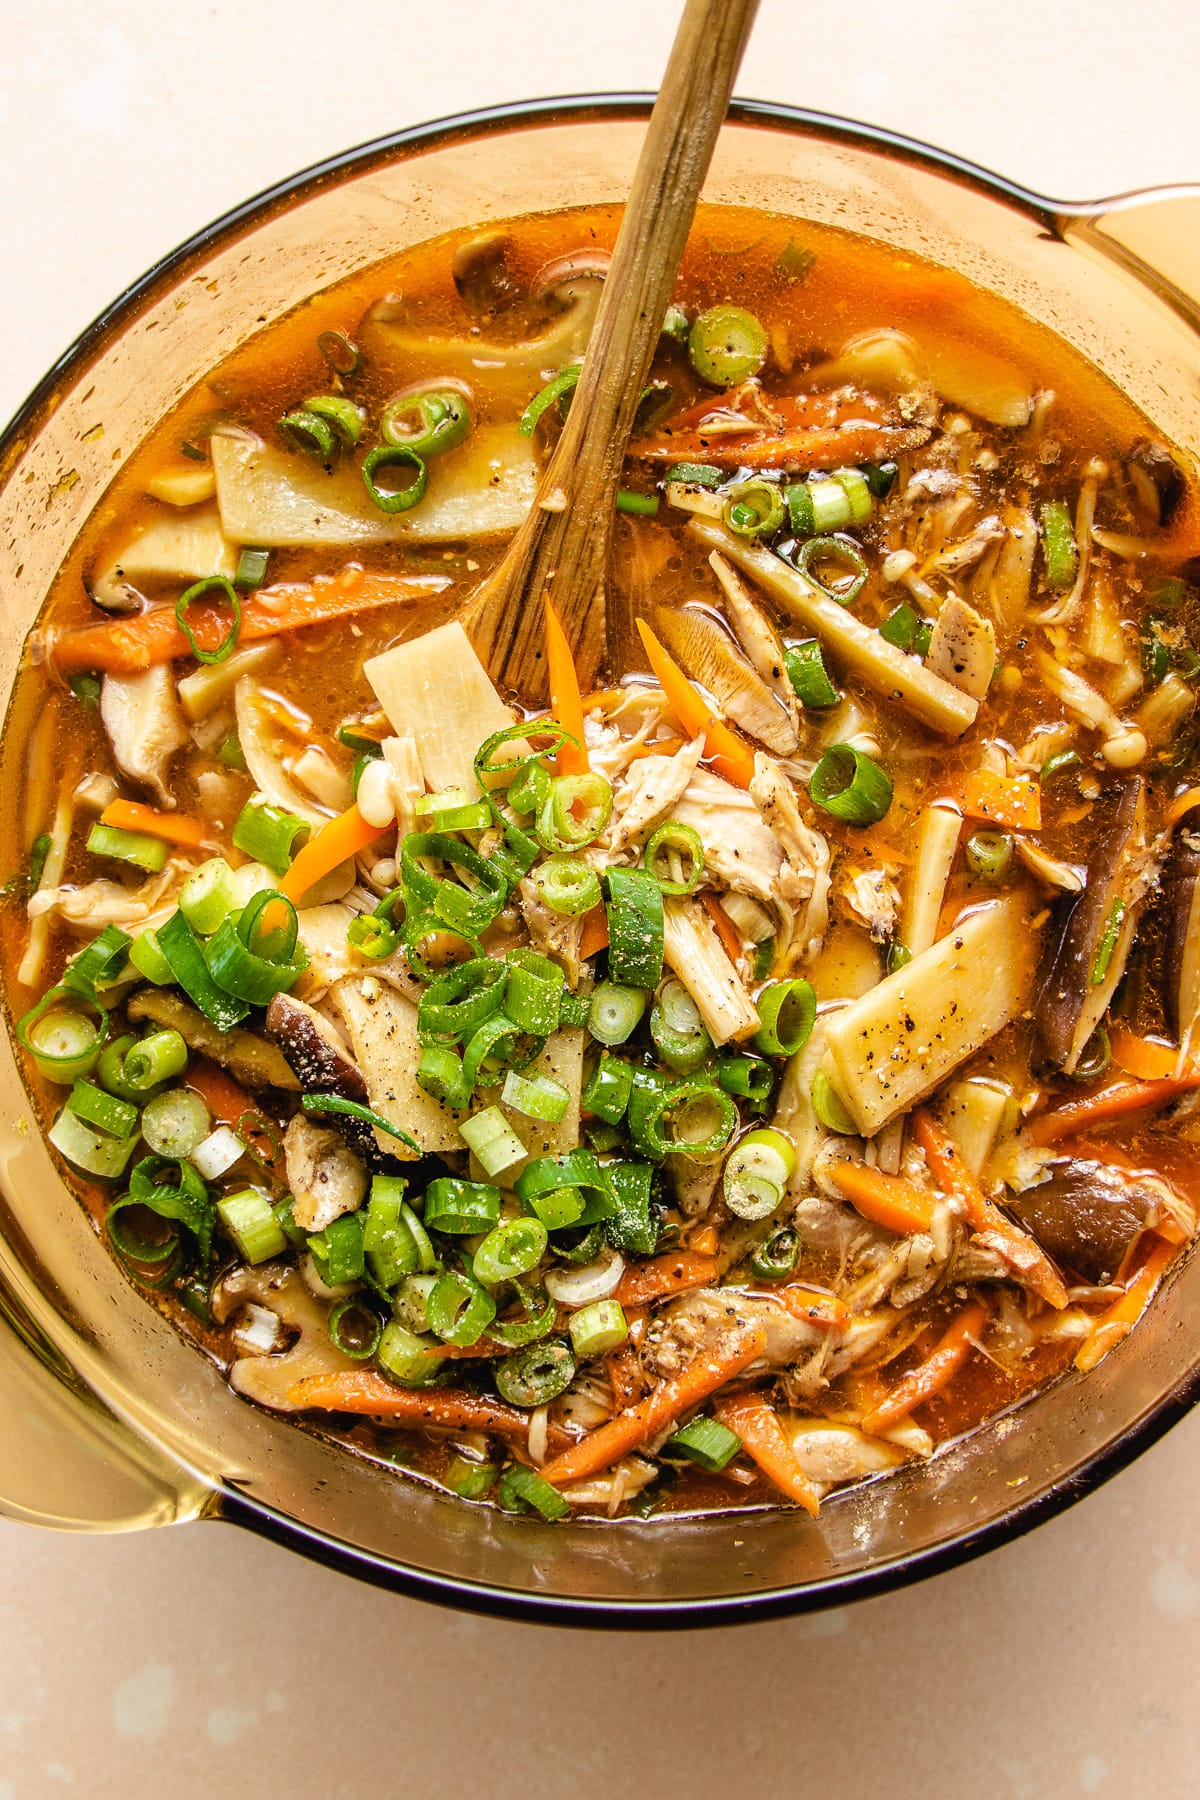 Photo shows a big pot of the soup with scallions on top